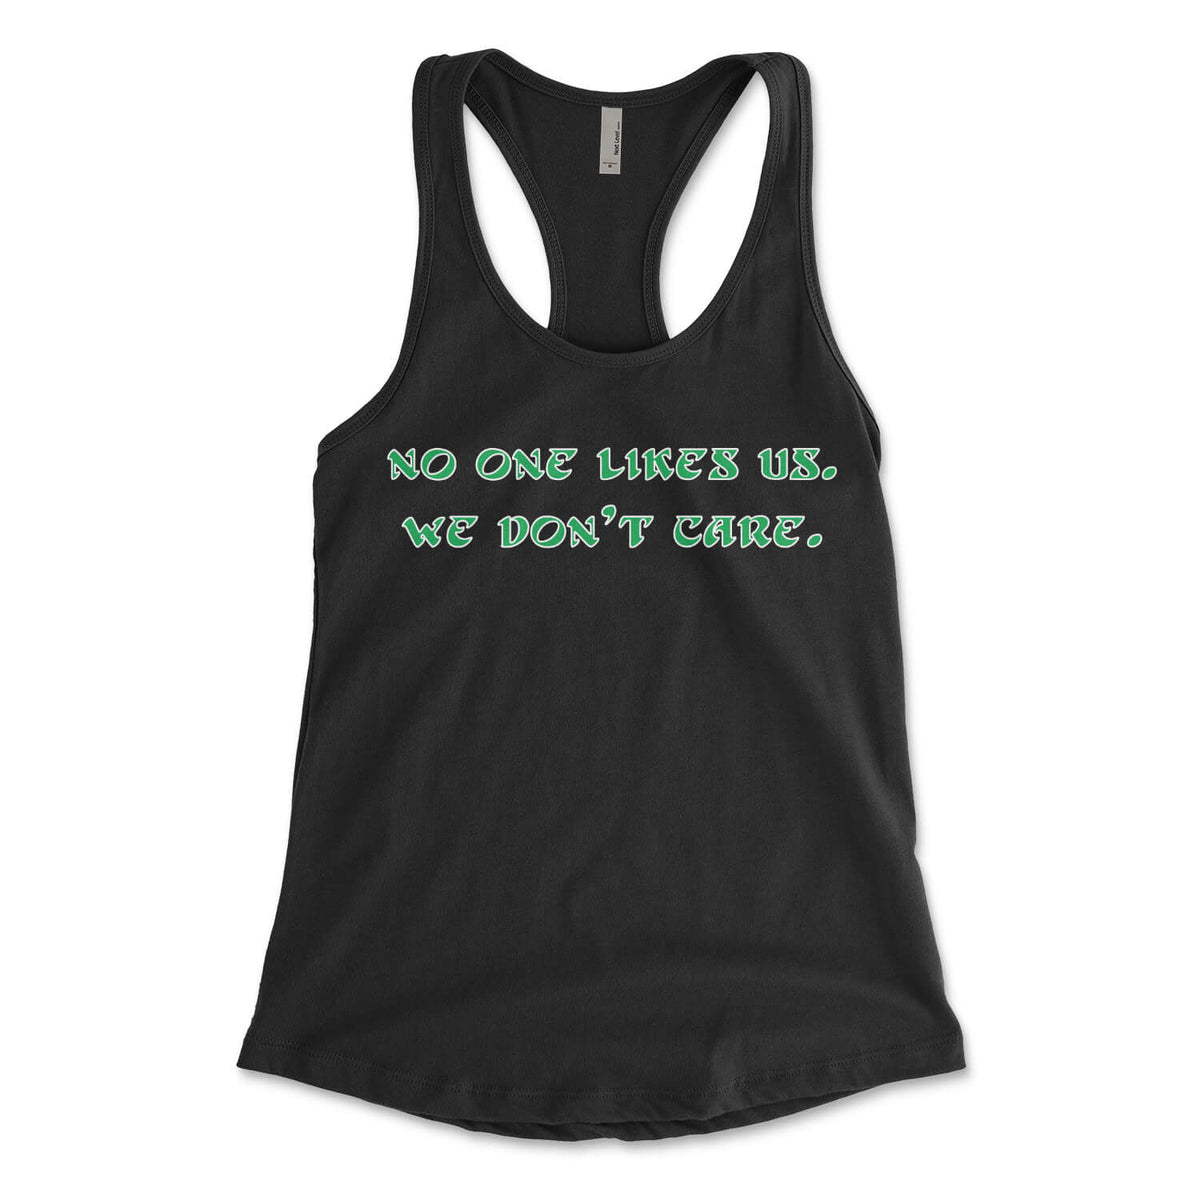 Philadelphia Eagles no one likes us we don&#39;t care black womens racerback tank top from Phillygoat